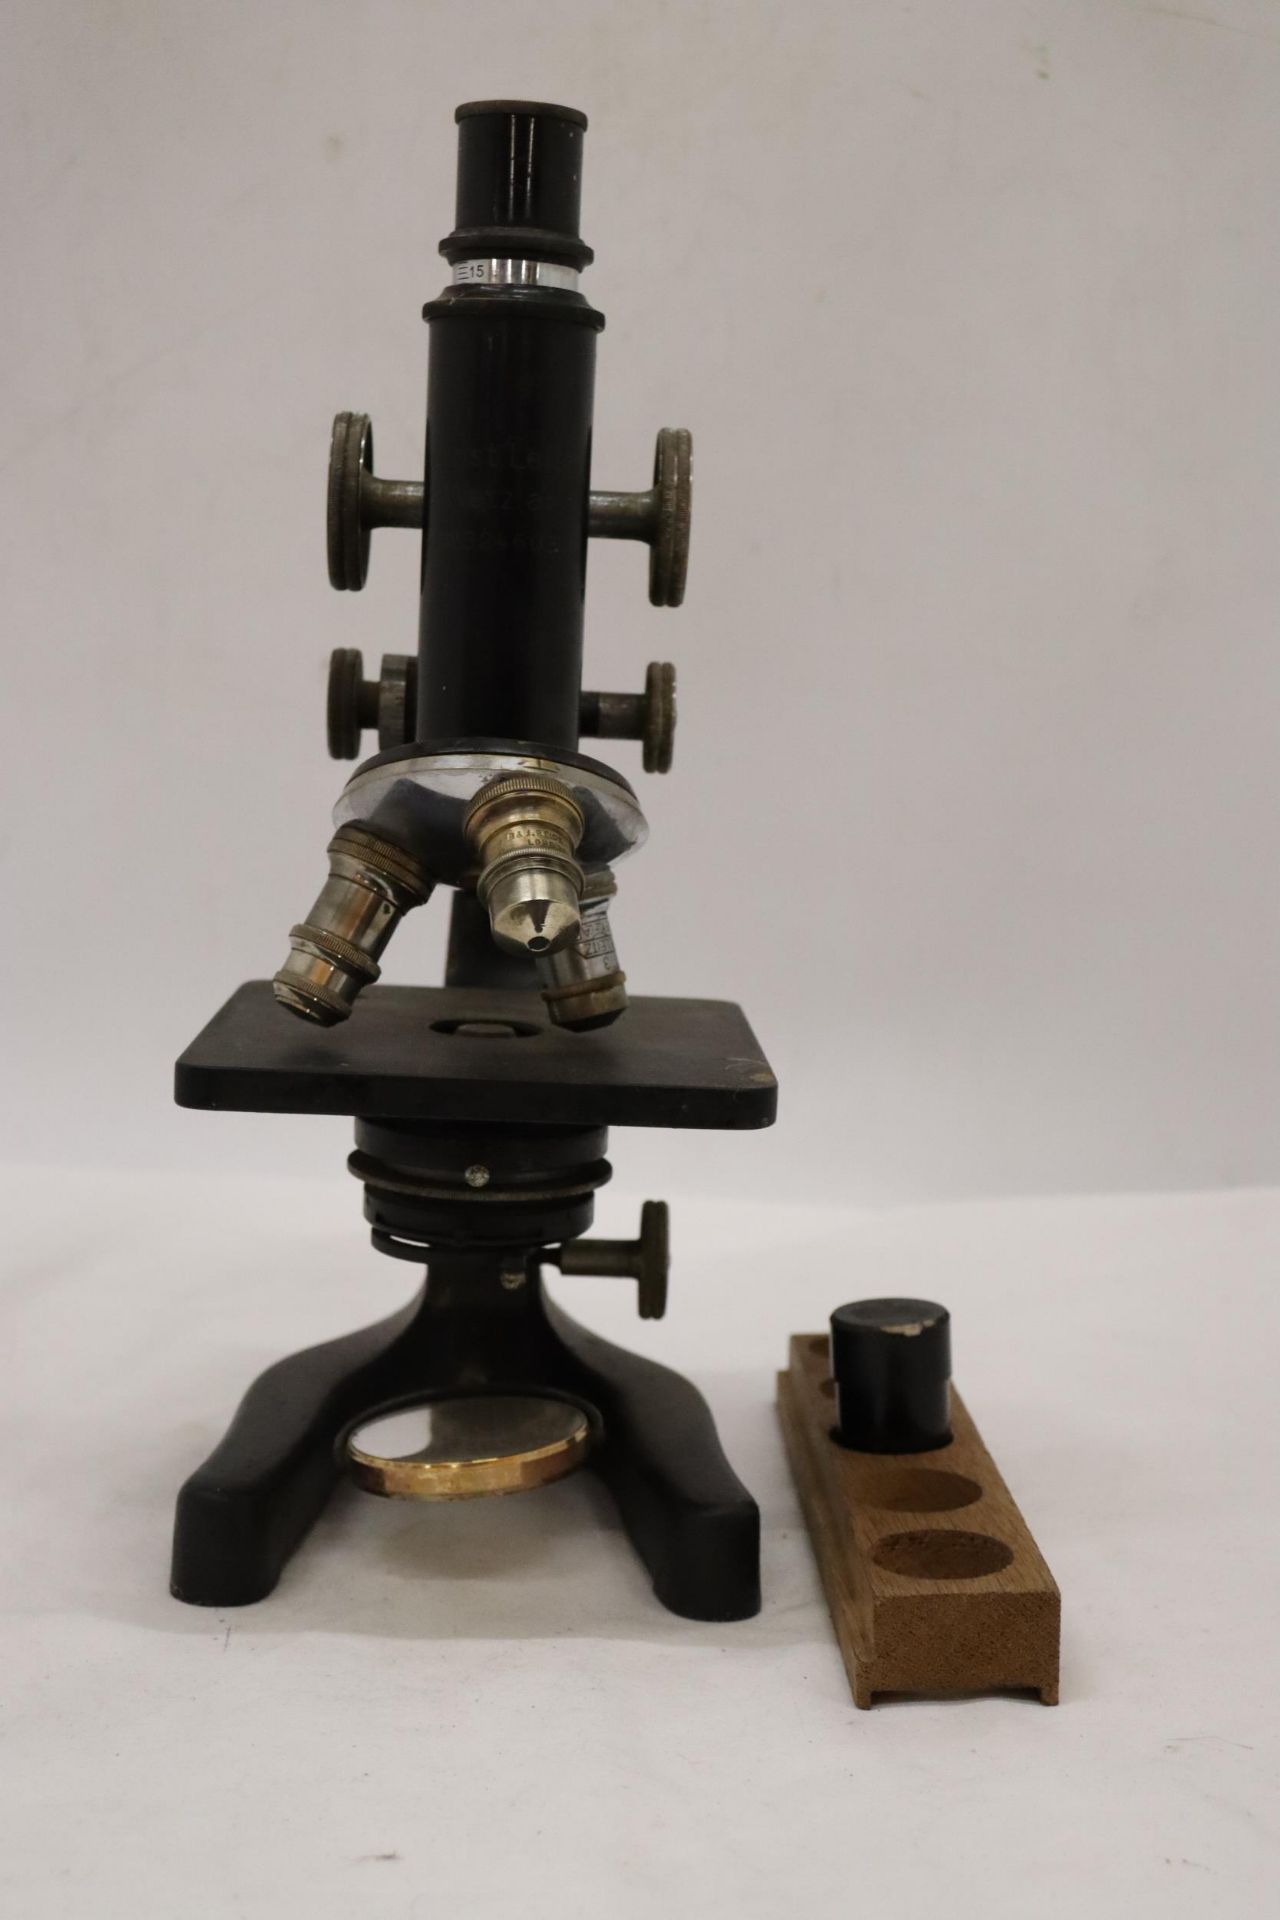 AN ERNST LEITZ WETZLAR MICROSCOPE, NO. 324603, WITH WOOD TRAY AND SPARE LENS